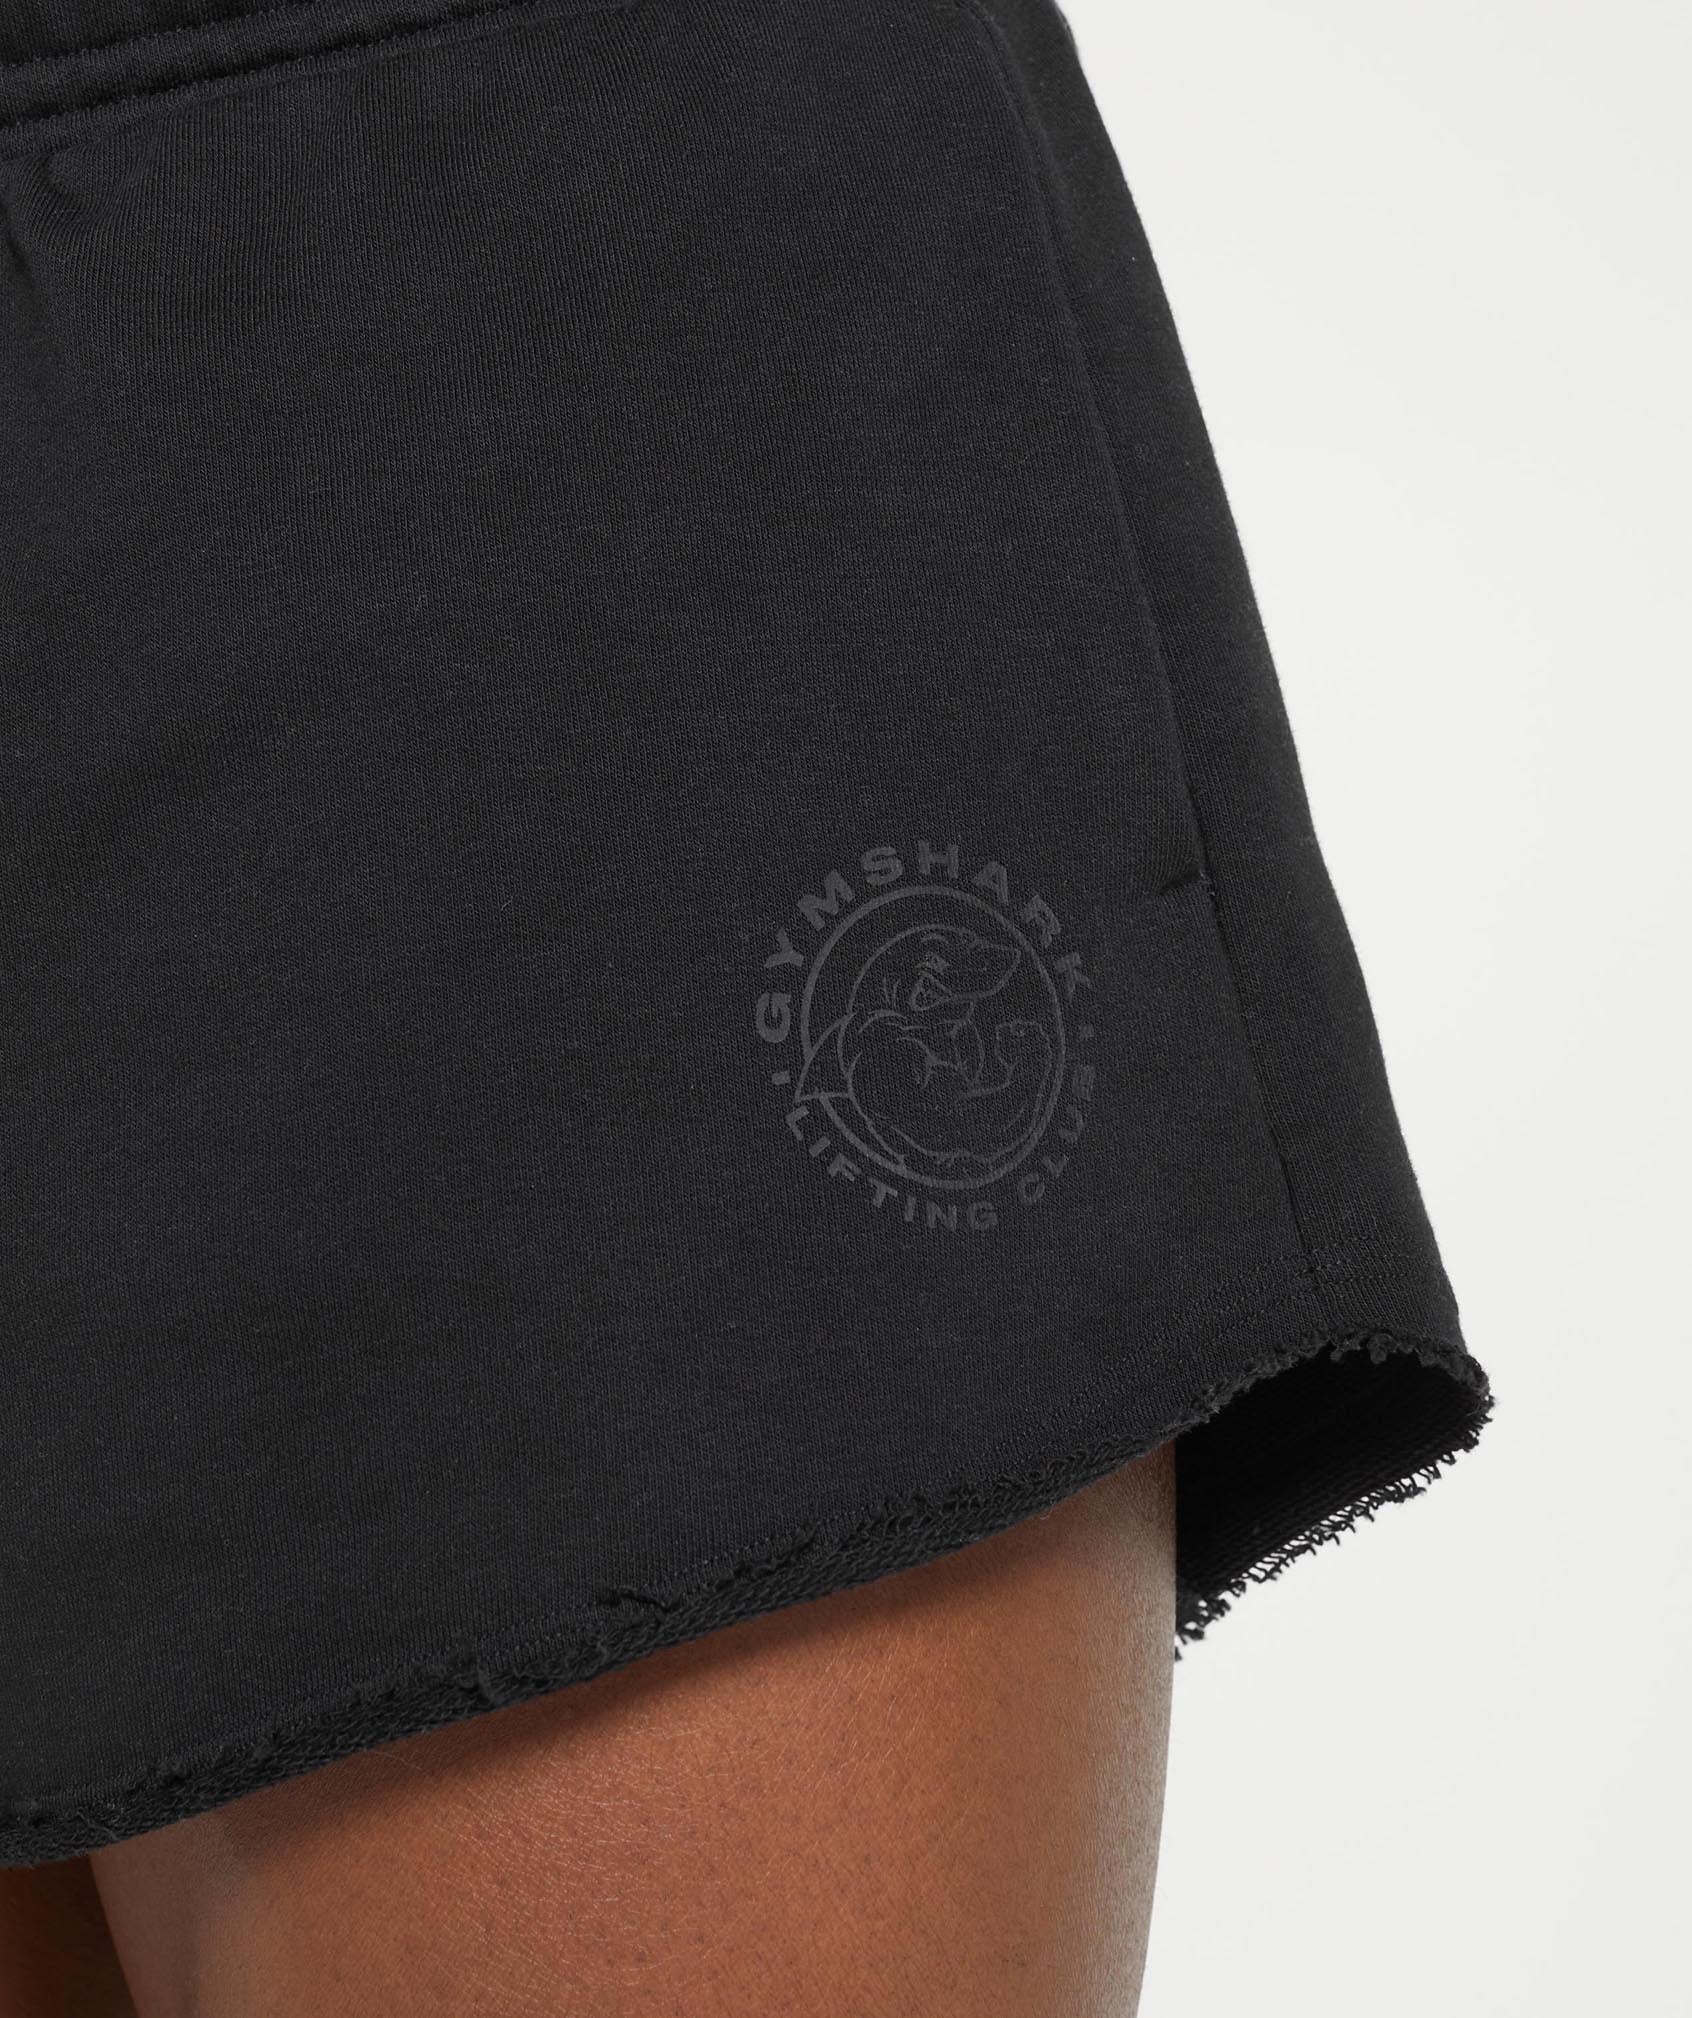 Legacy Shorts in Black - view 6